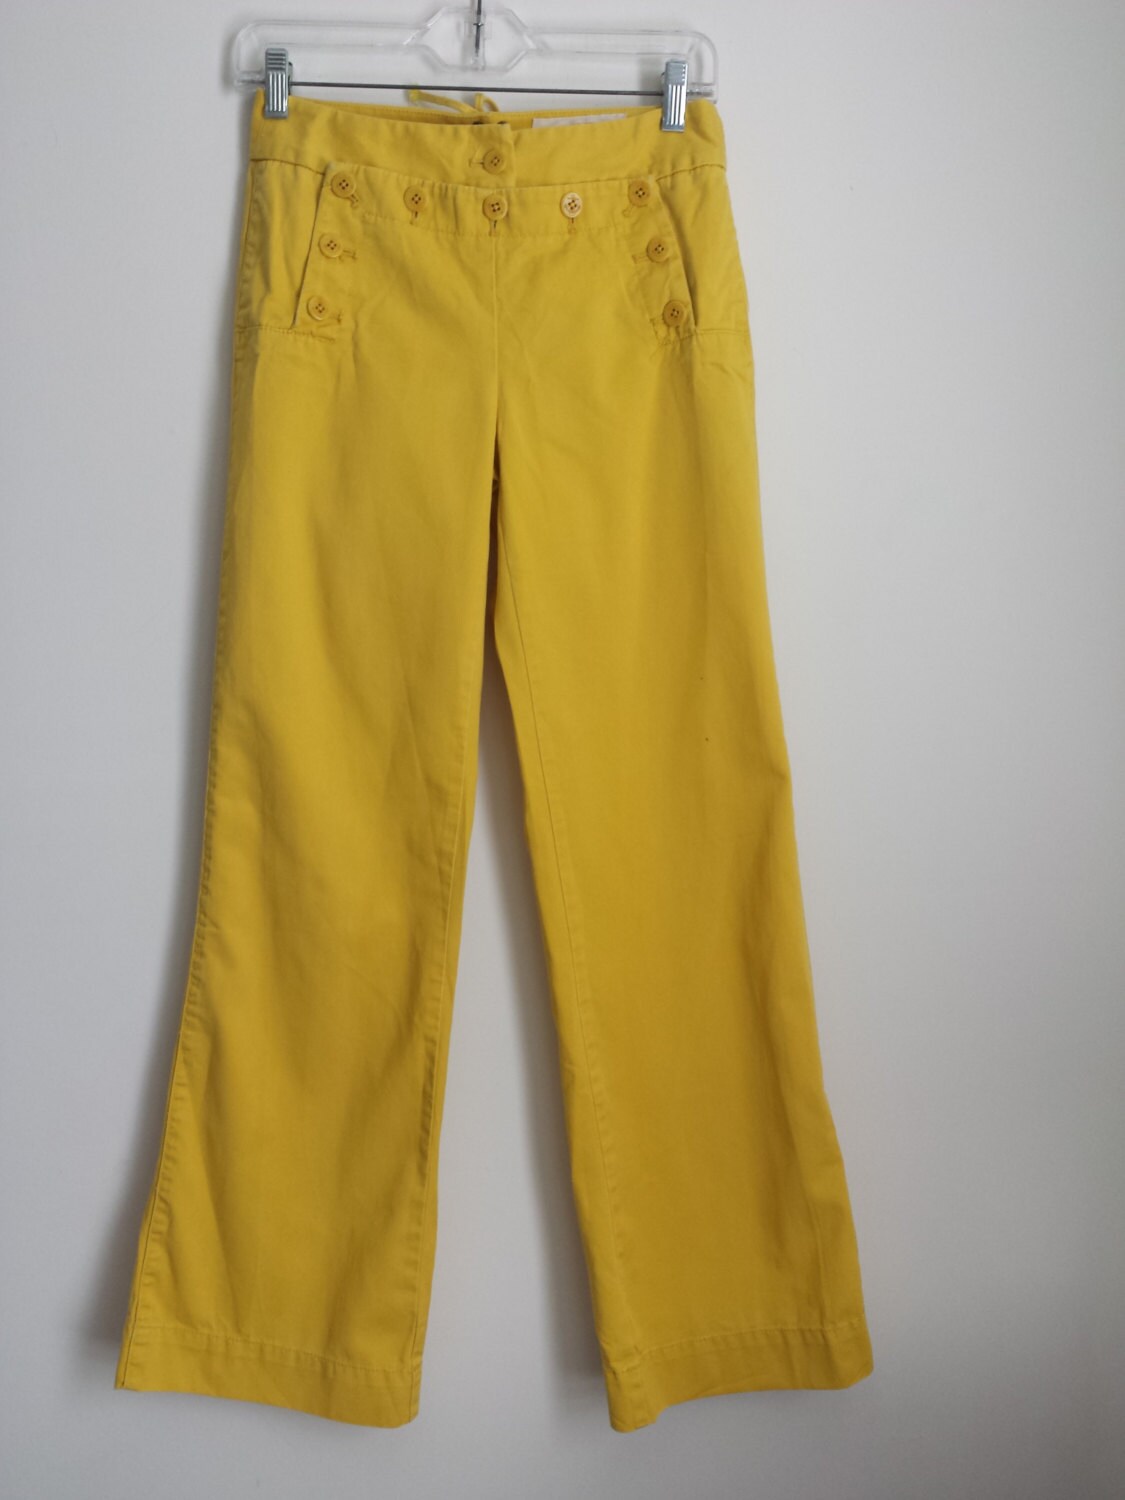 Vintage J Crew Classic Twill Chino Medium Rise City Fit by jnh5855